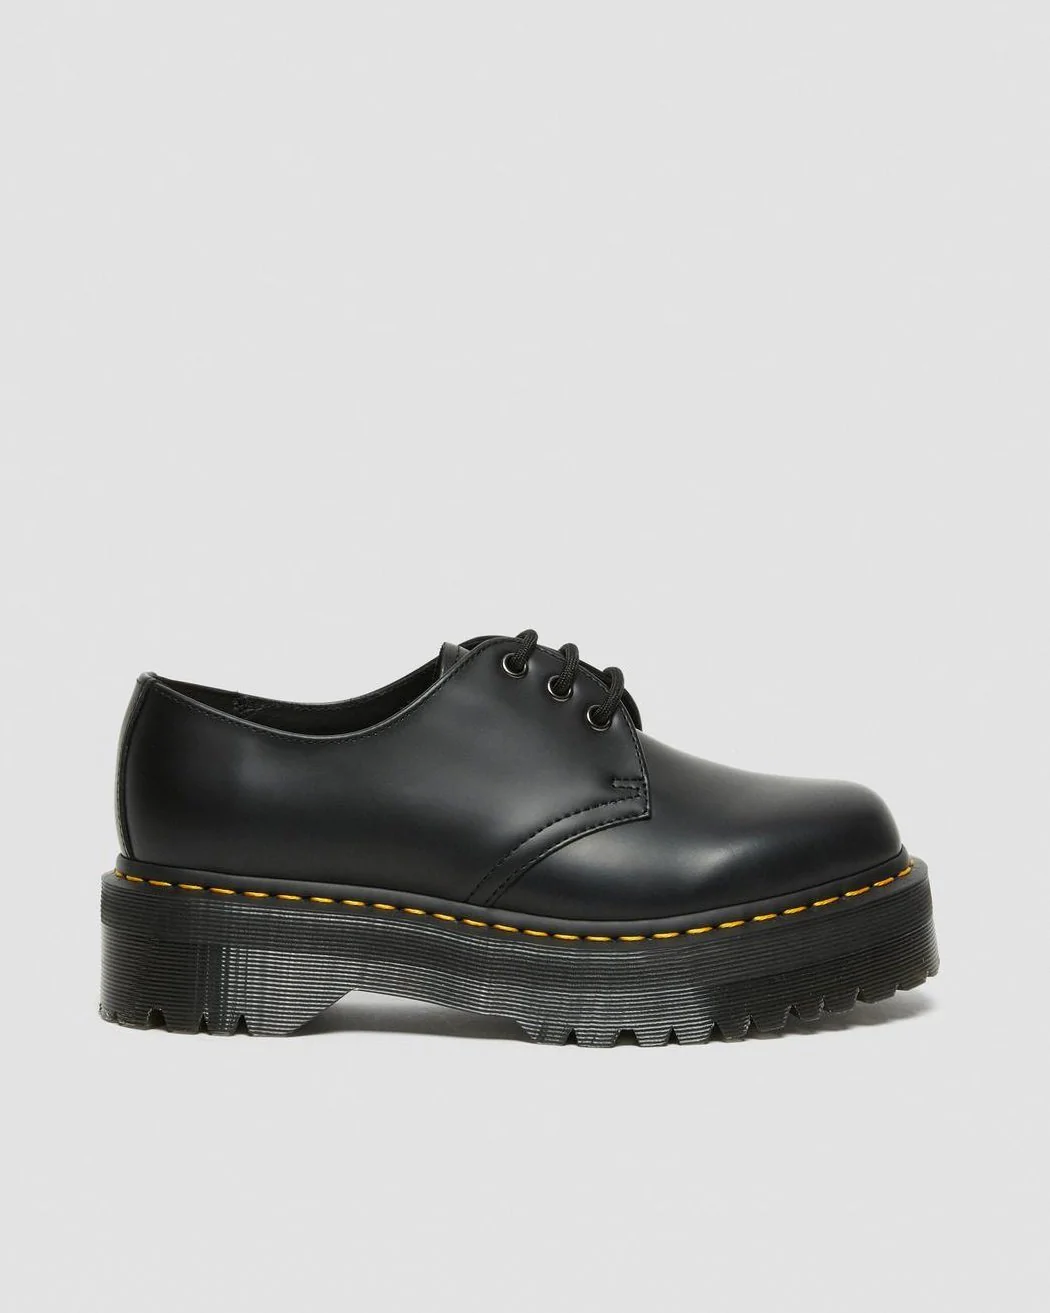 Dr. Martens 1461 Quad Chunky Lace Up Shoes